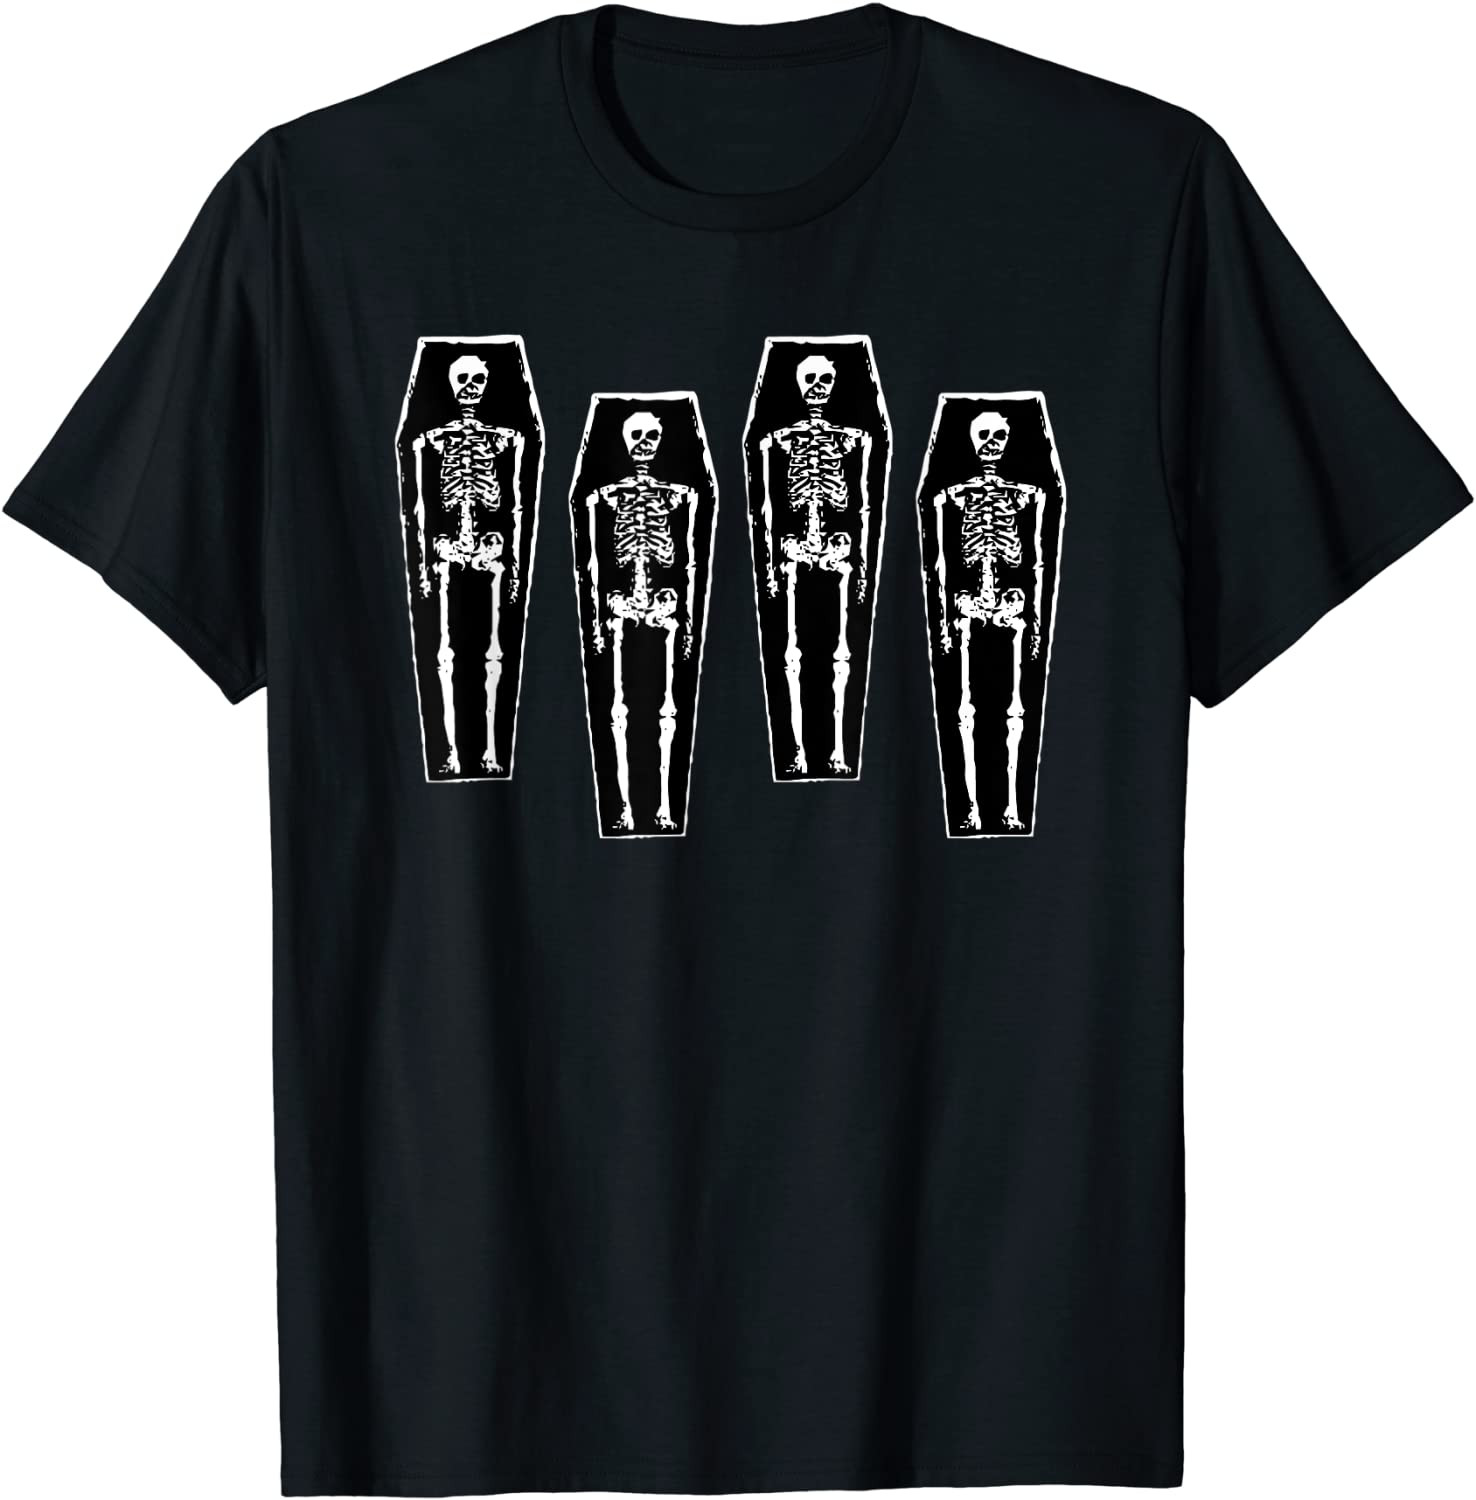 Skeletons And Coffins Dark Death For A Goth Punk Halloween T-Shirt